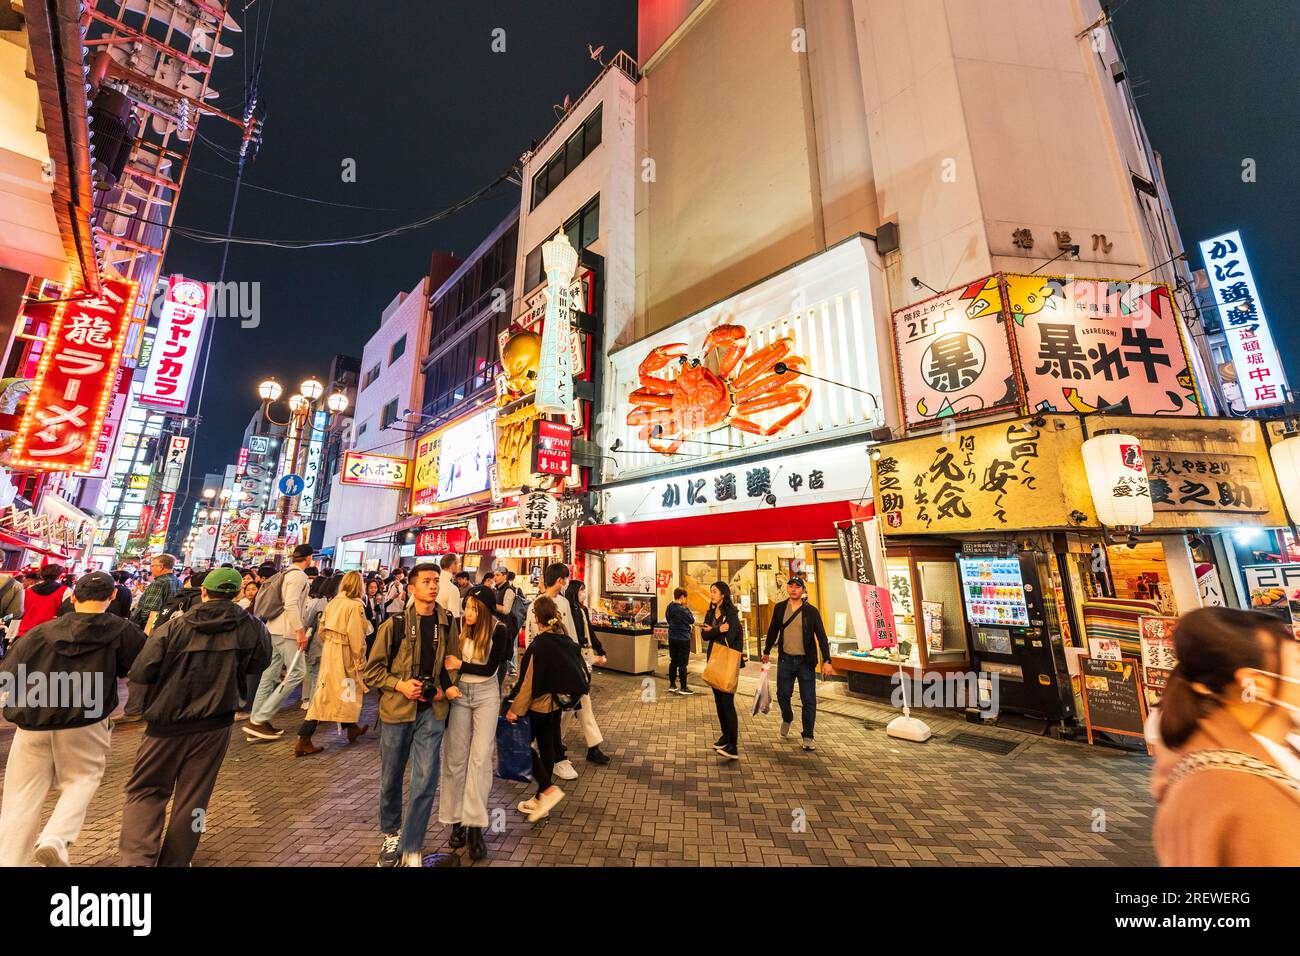 Night view along the busy crowded Dotonbori street with the popular Kani Doraku seafood restaurant with its large mechanical crab above the entrance. Stock Photo